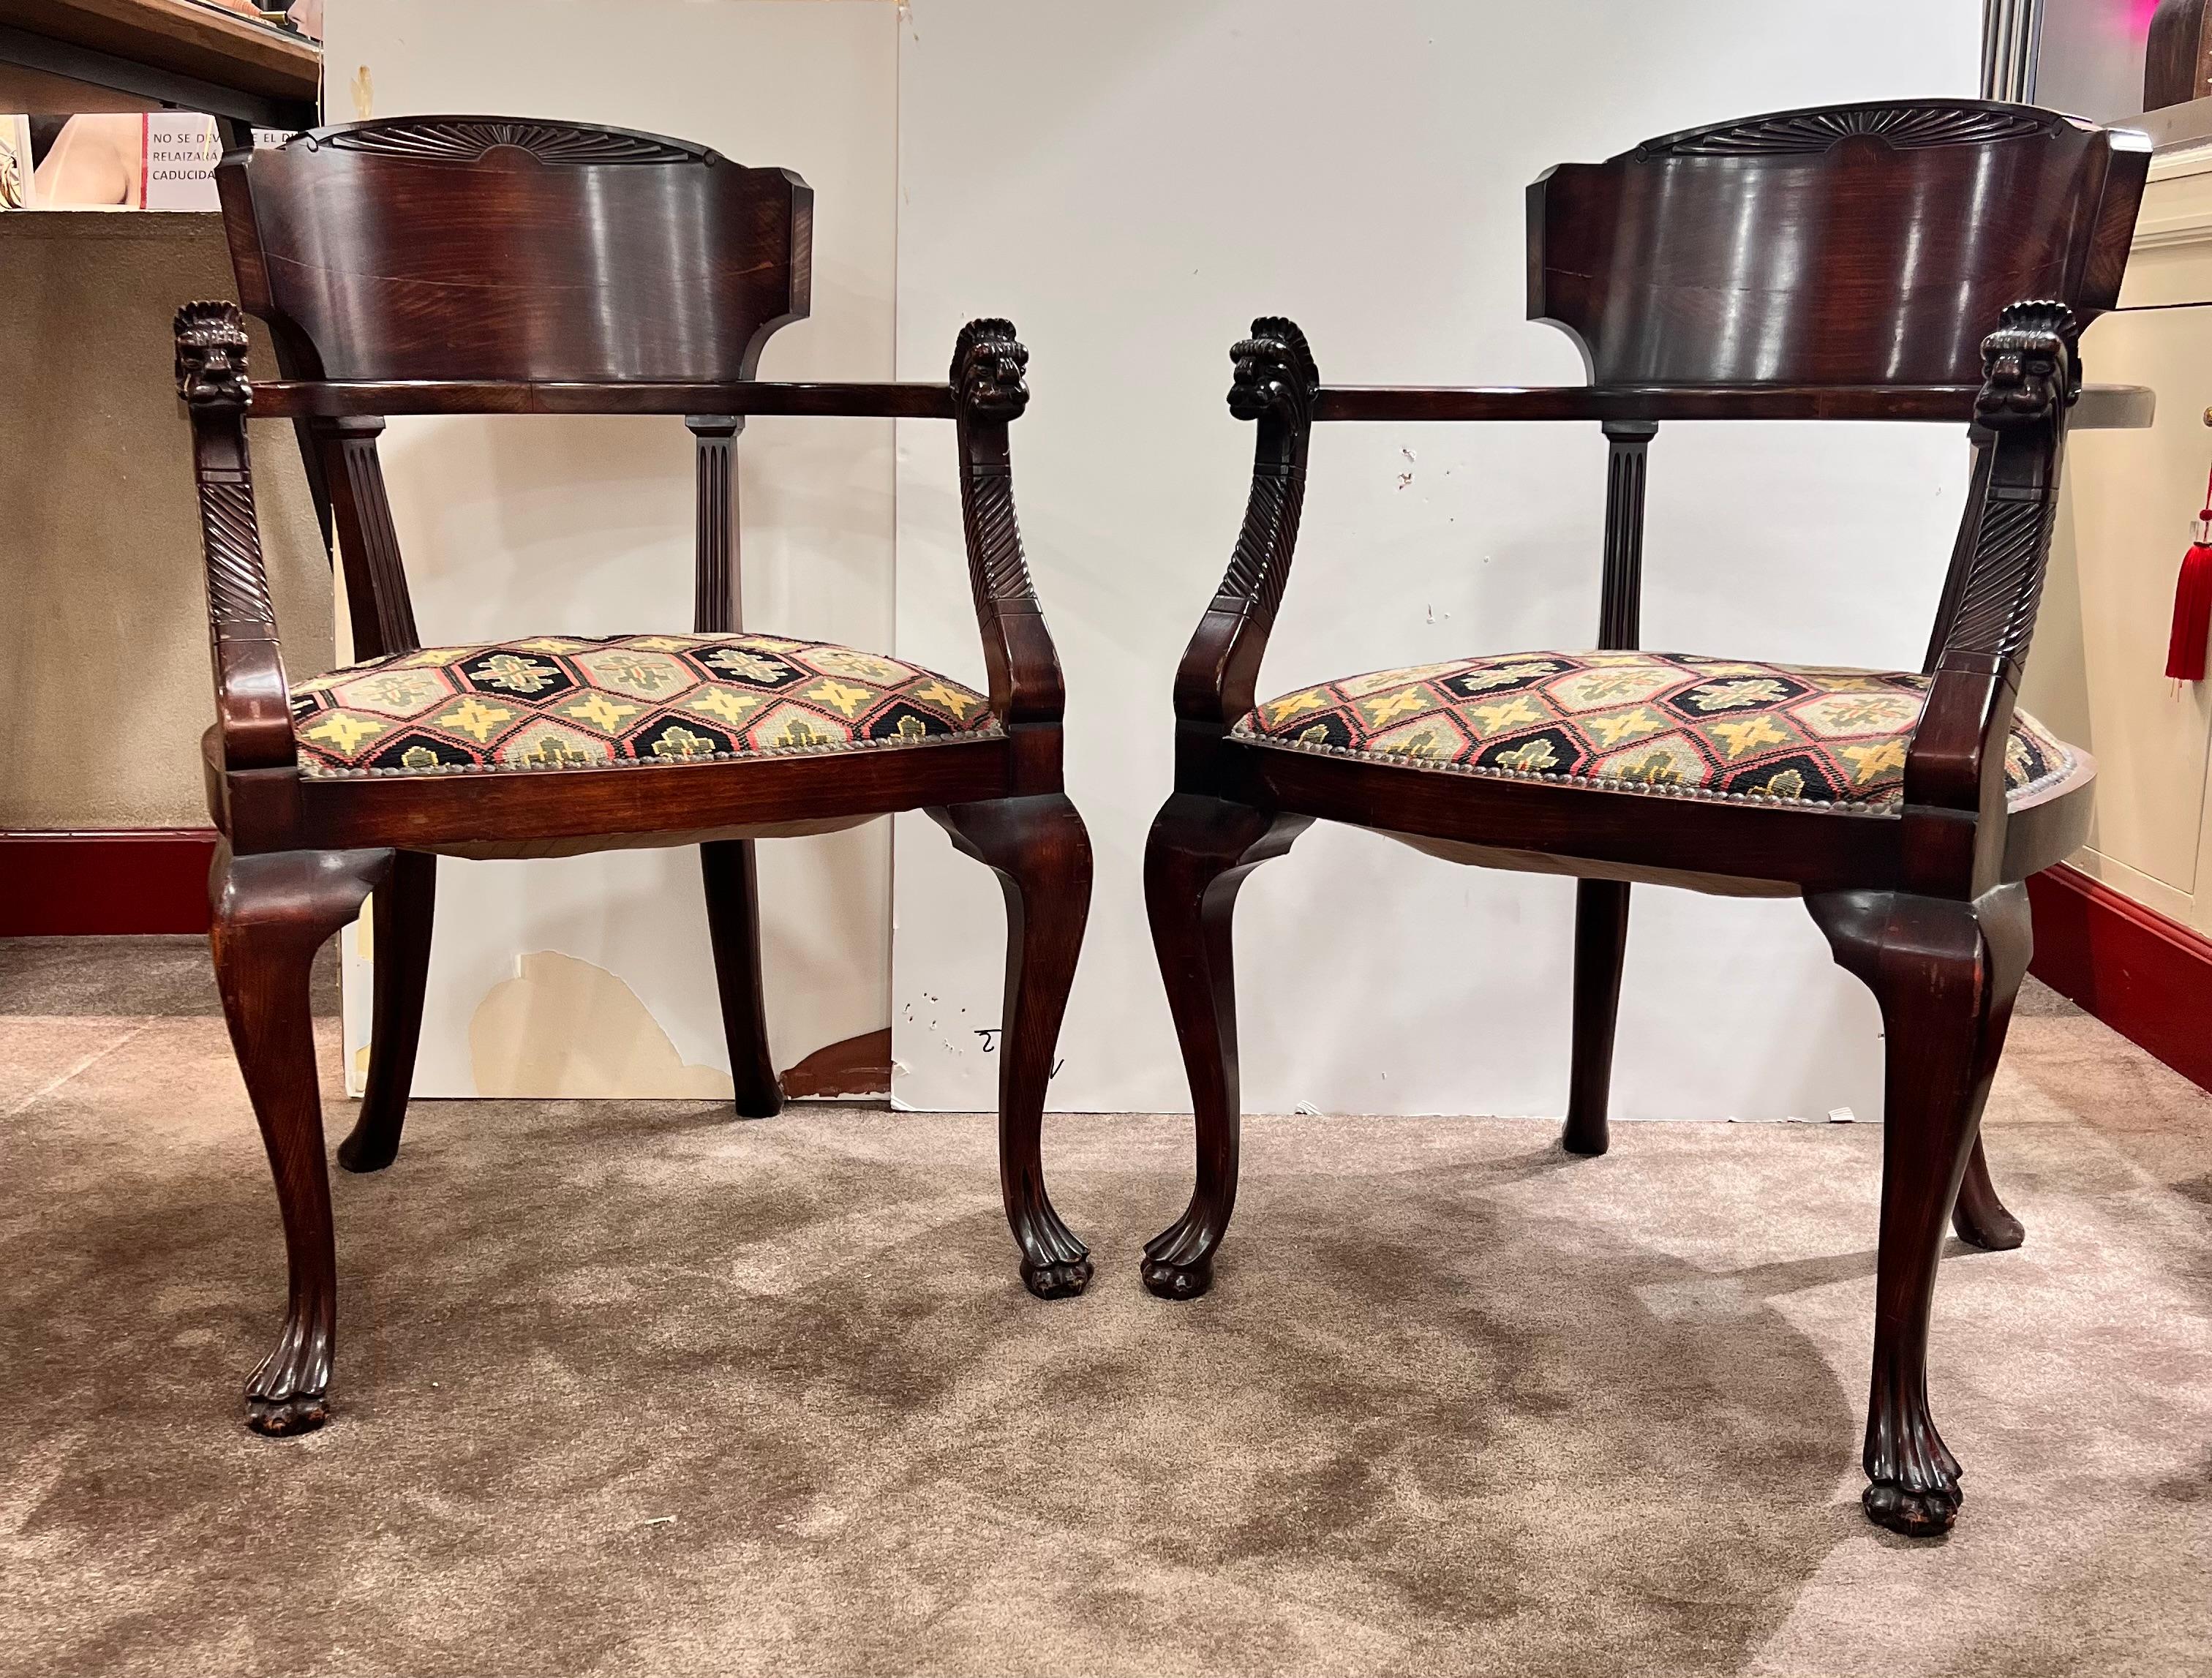 1850s European Empire Mahogany pair armchairs with Griffin God face and feet..

Upholstery with Osborne & Little with heraldic pattern in cross stich fabric. 
Dimensions Chair 
Height: 35,43 in. (90cm) 
Width: 23.62 in. (60cm) 
Depth: 20.07